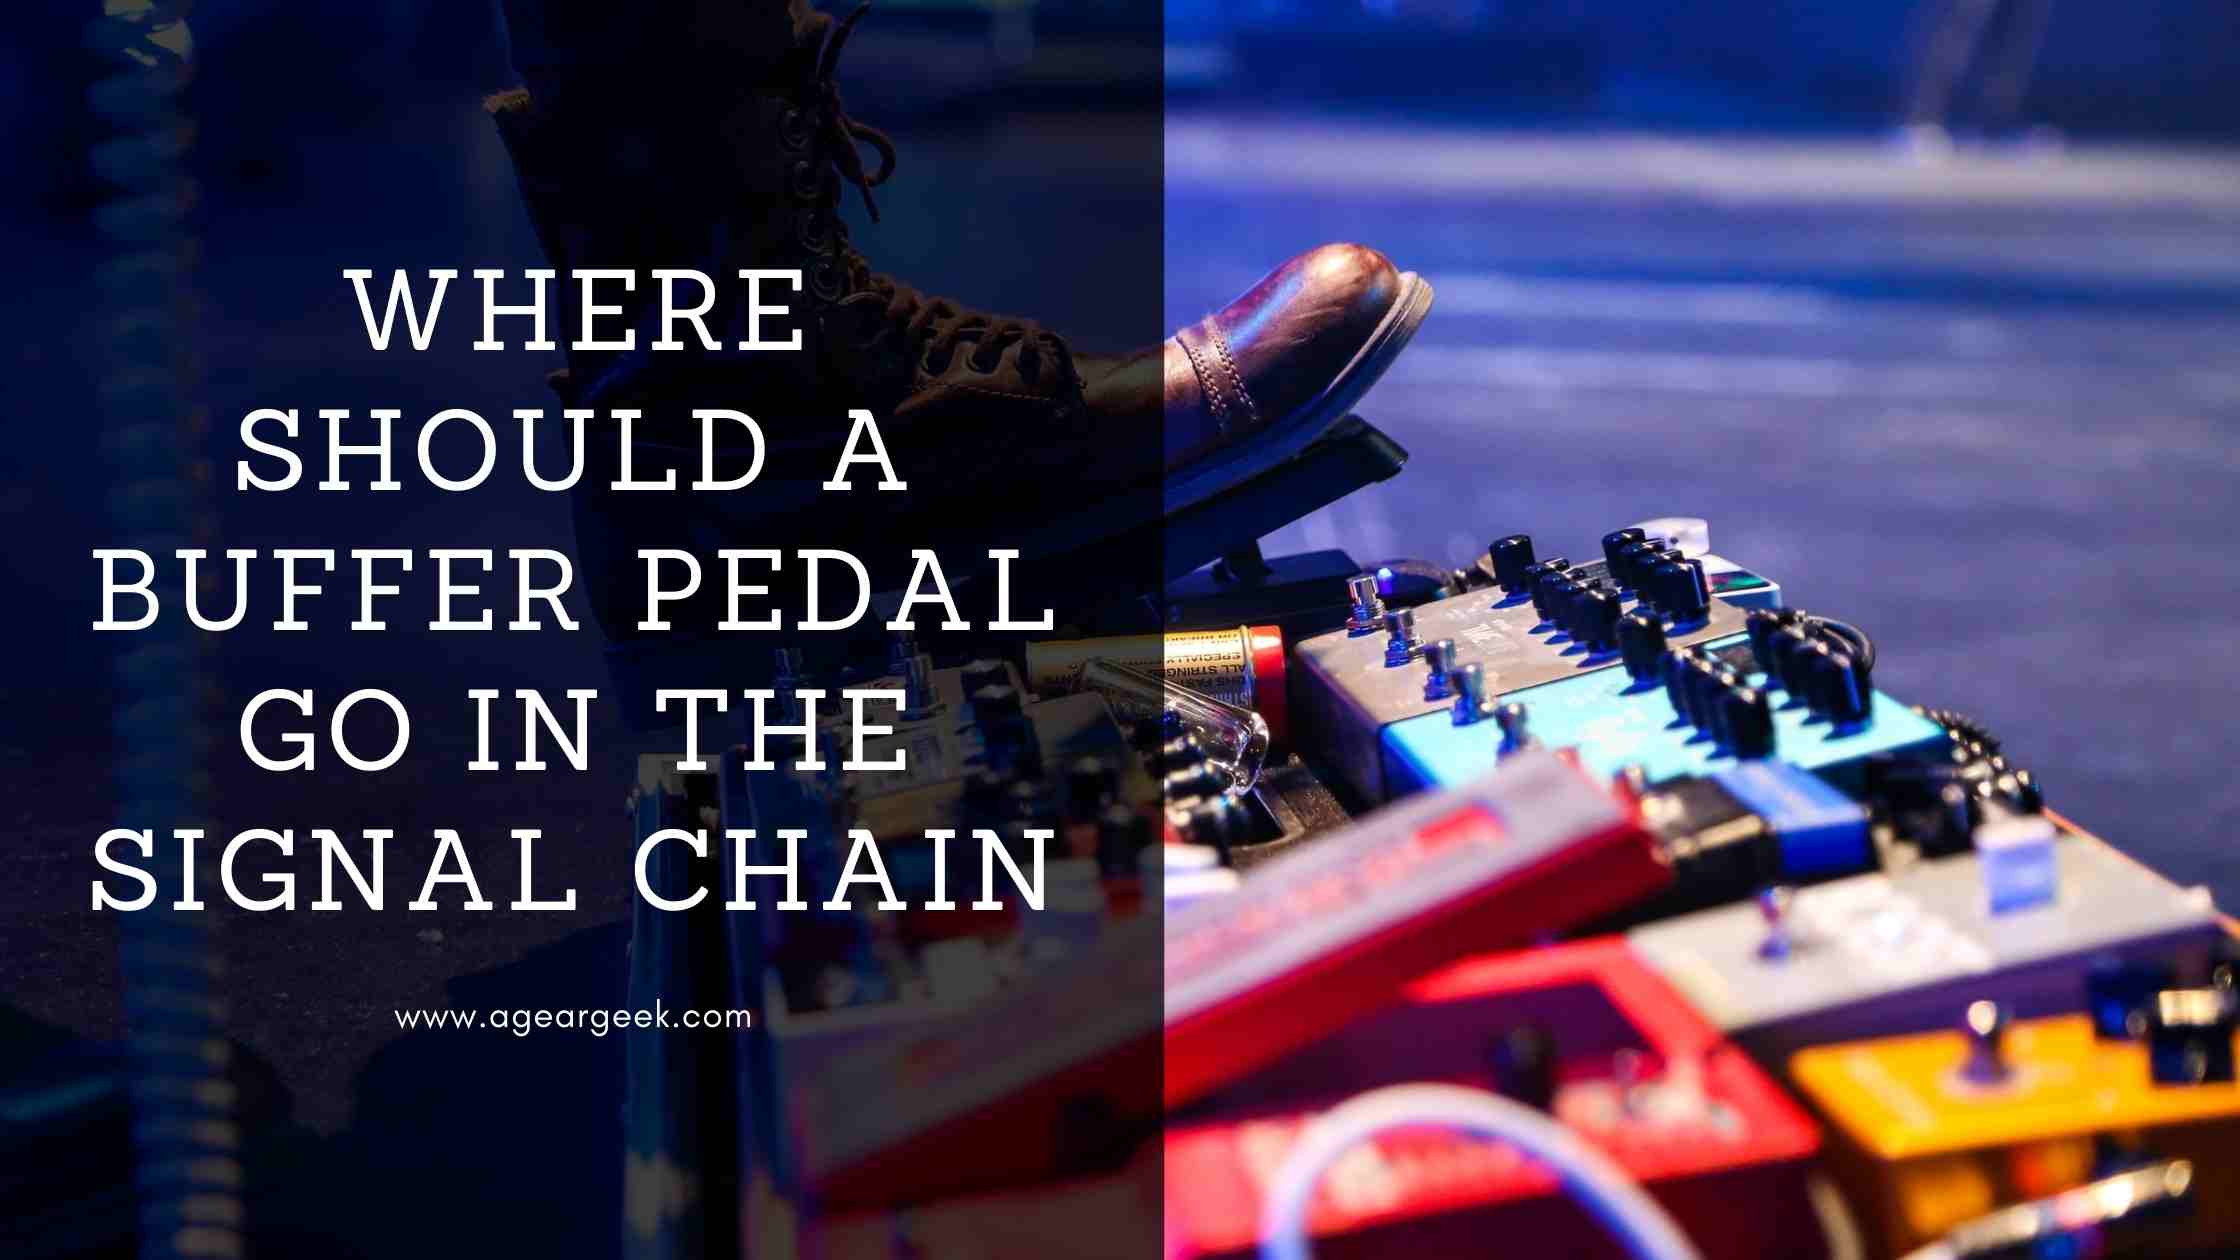 Where should a buffer pedal go in the signal chain